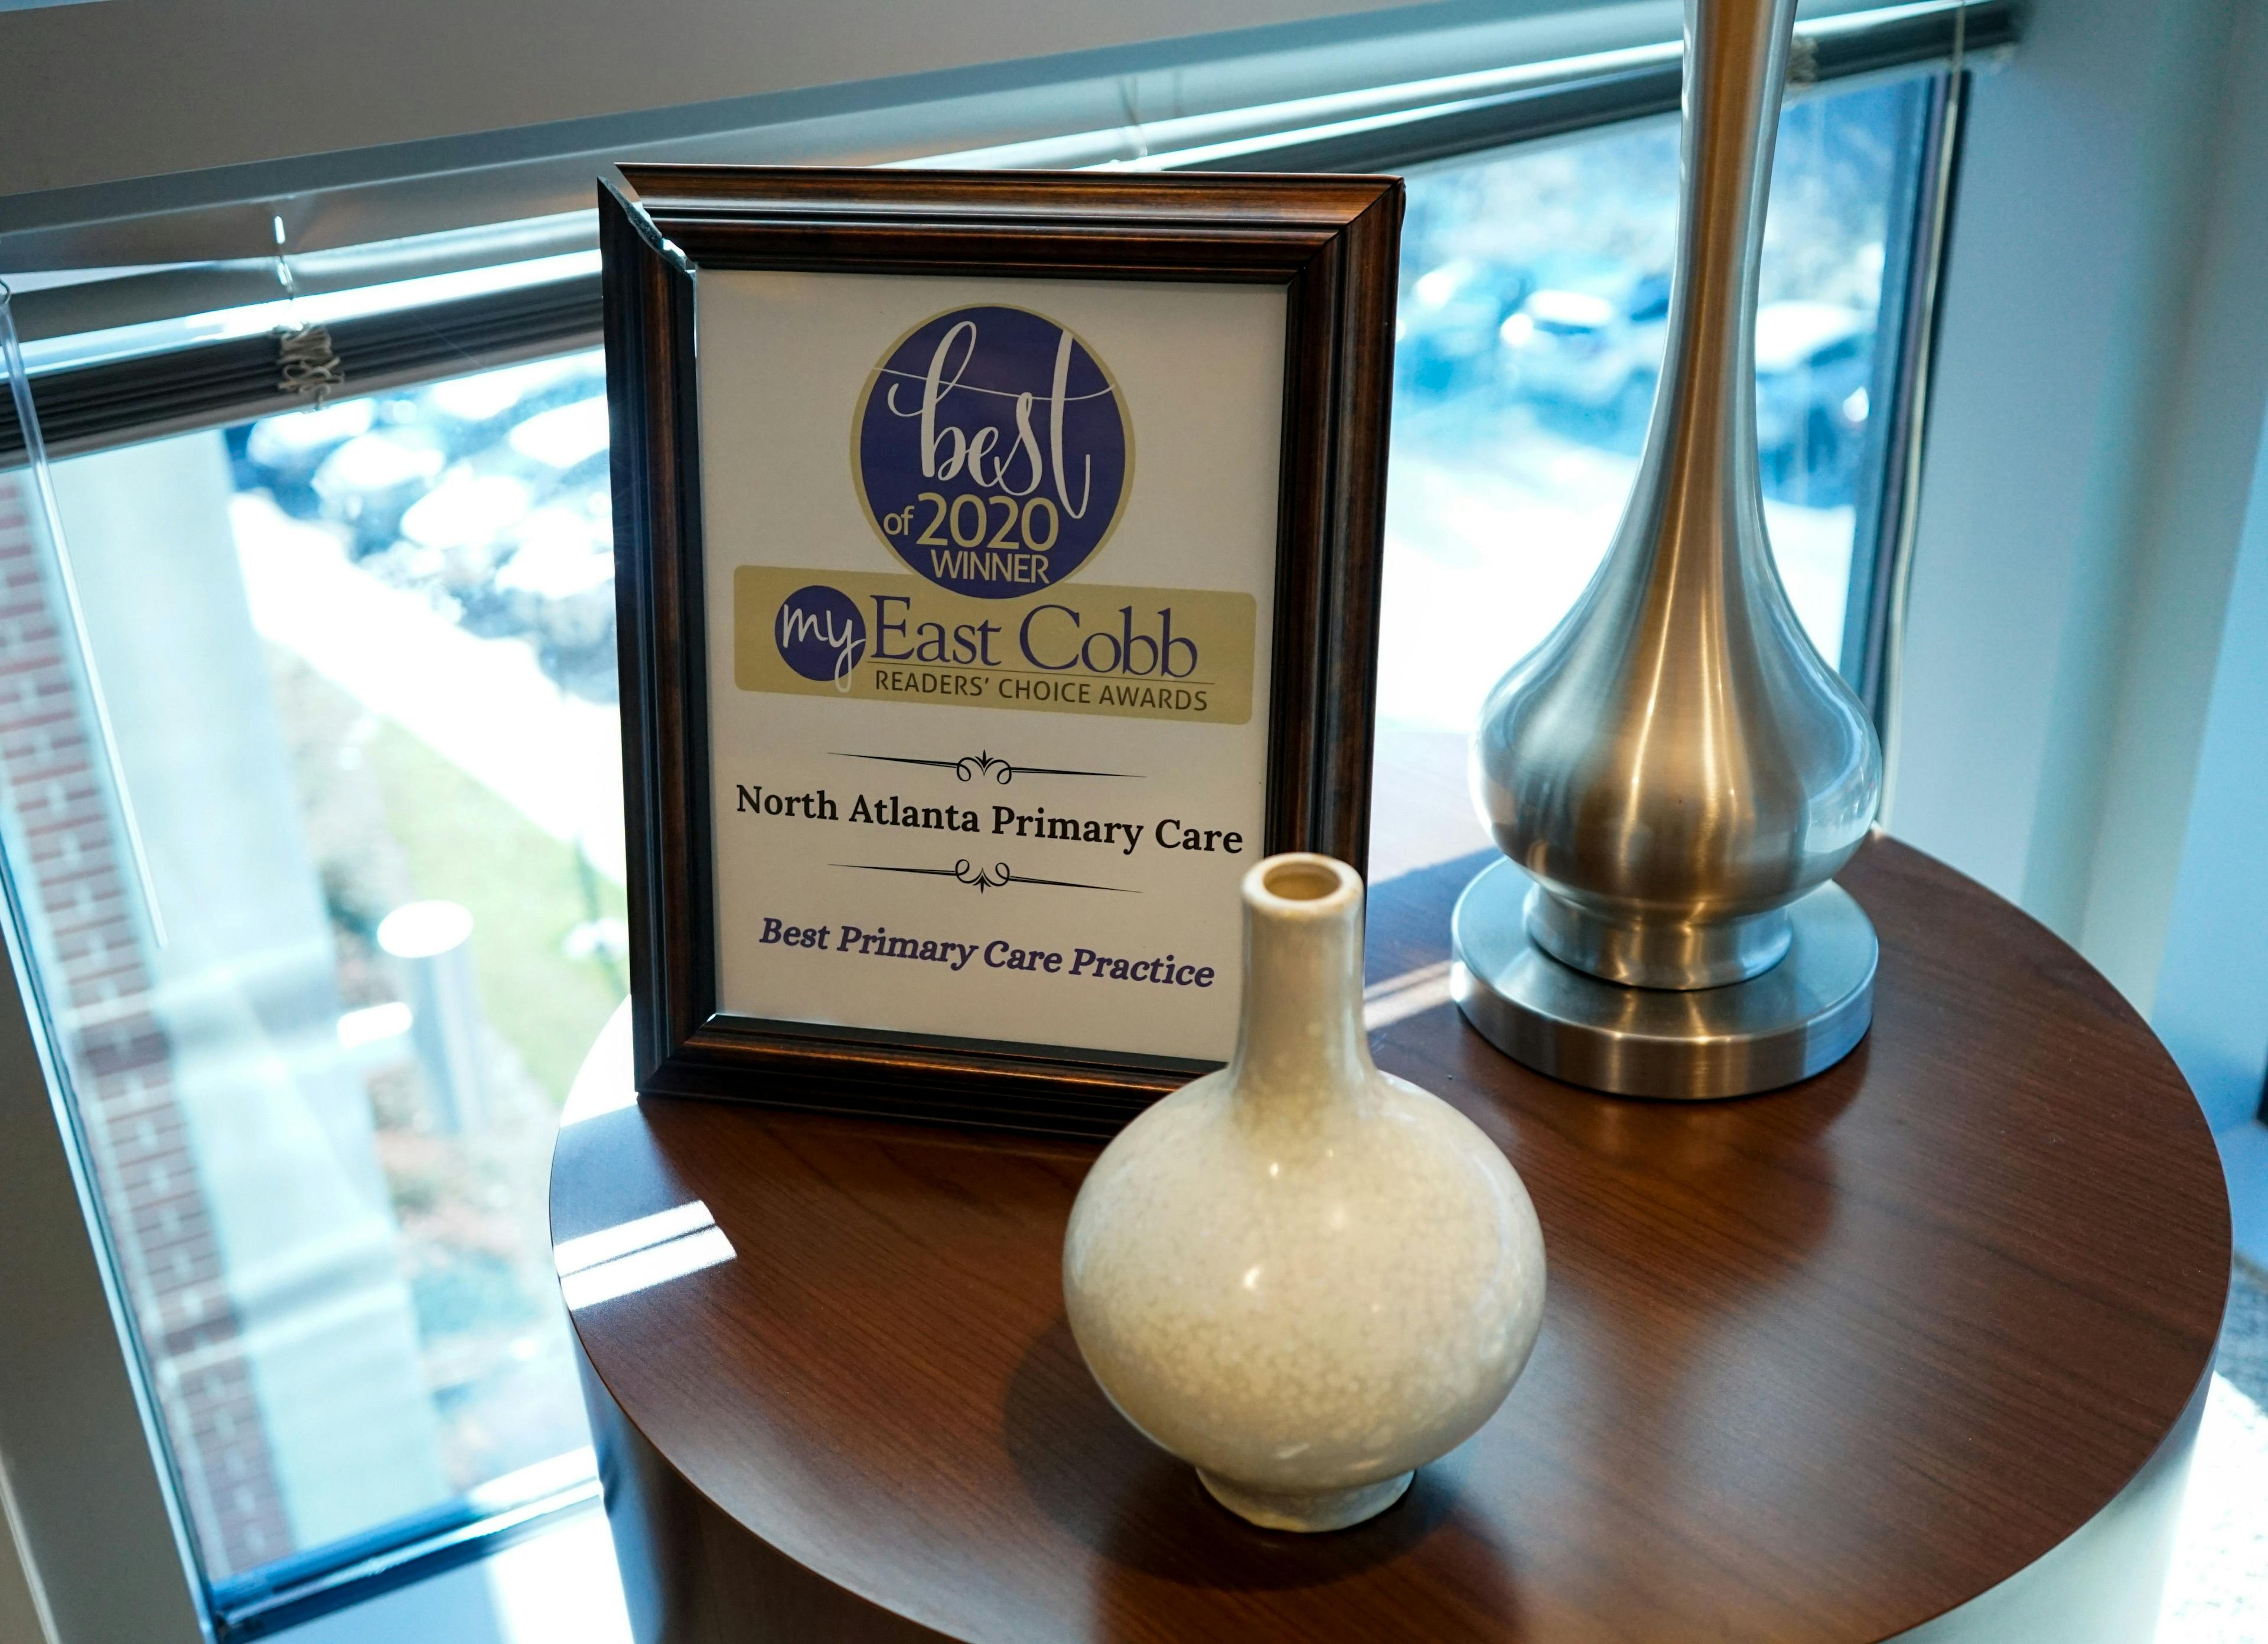 a vase is sitting on a table next to a framed sign that says north atlanta primary care best primary care practice .